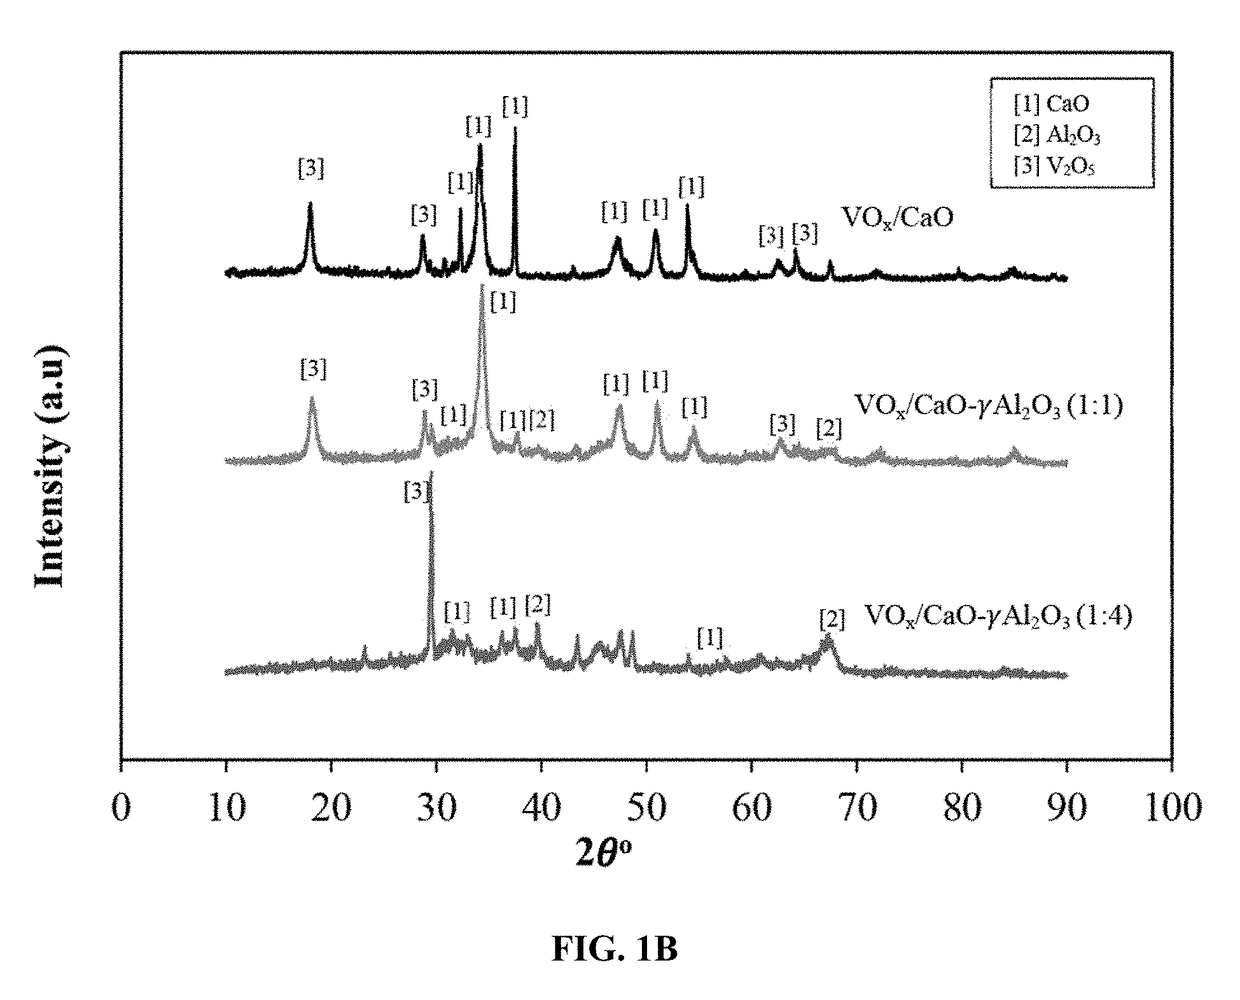 Fluidizable vanadium catalyst for oxidative dehydrogenation of alkanes to olefins in a gas phase oxygen free environment